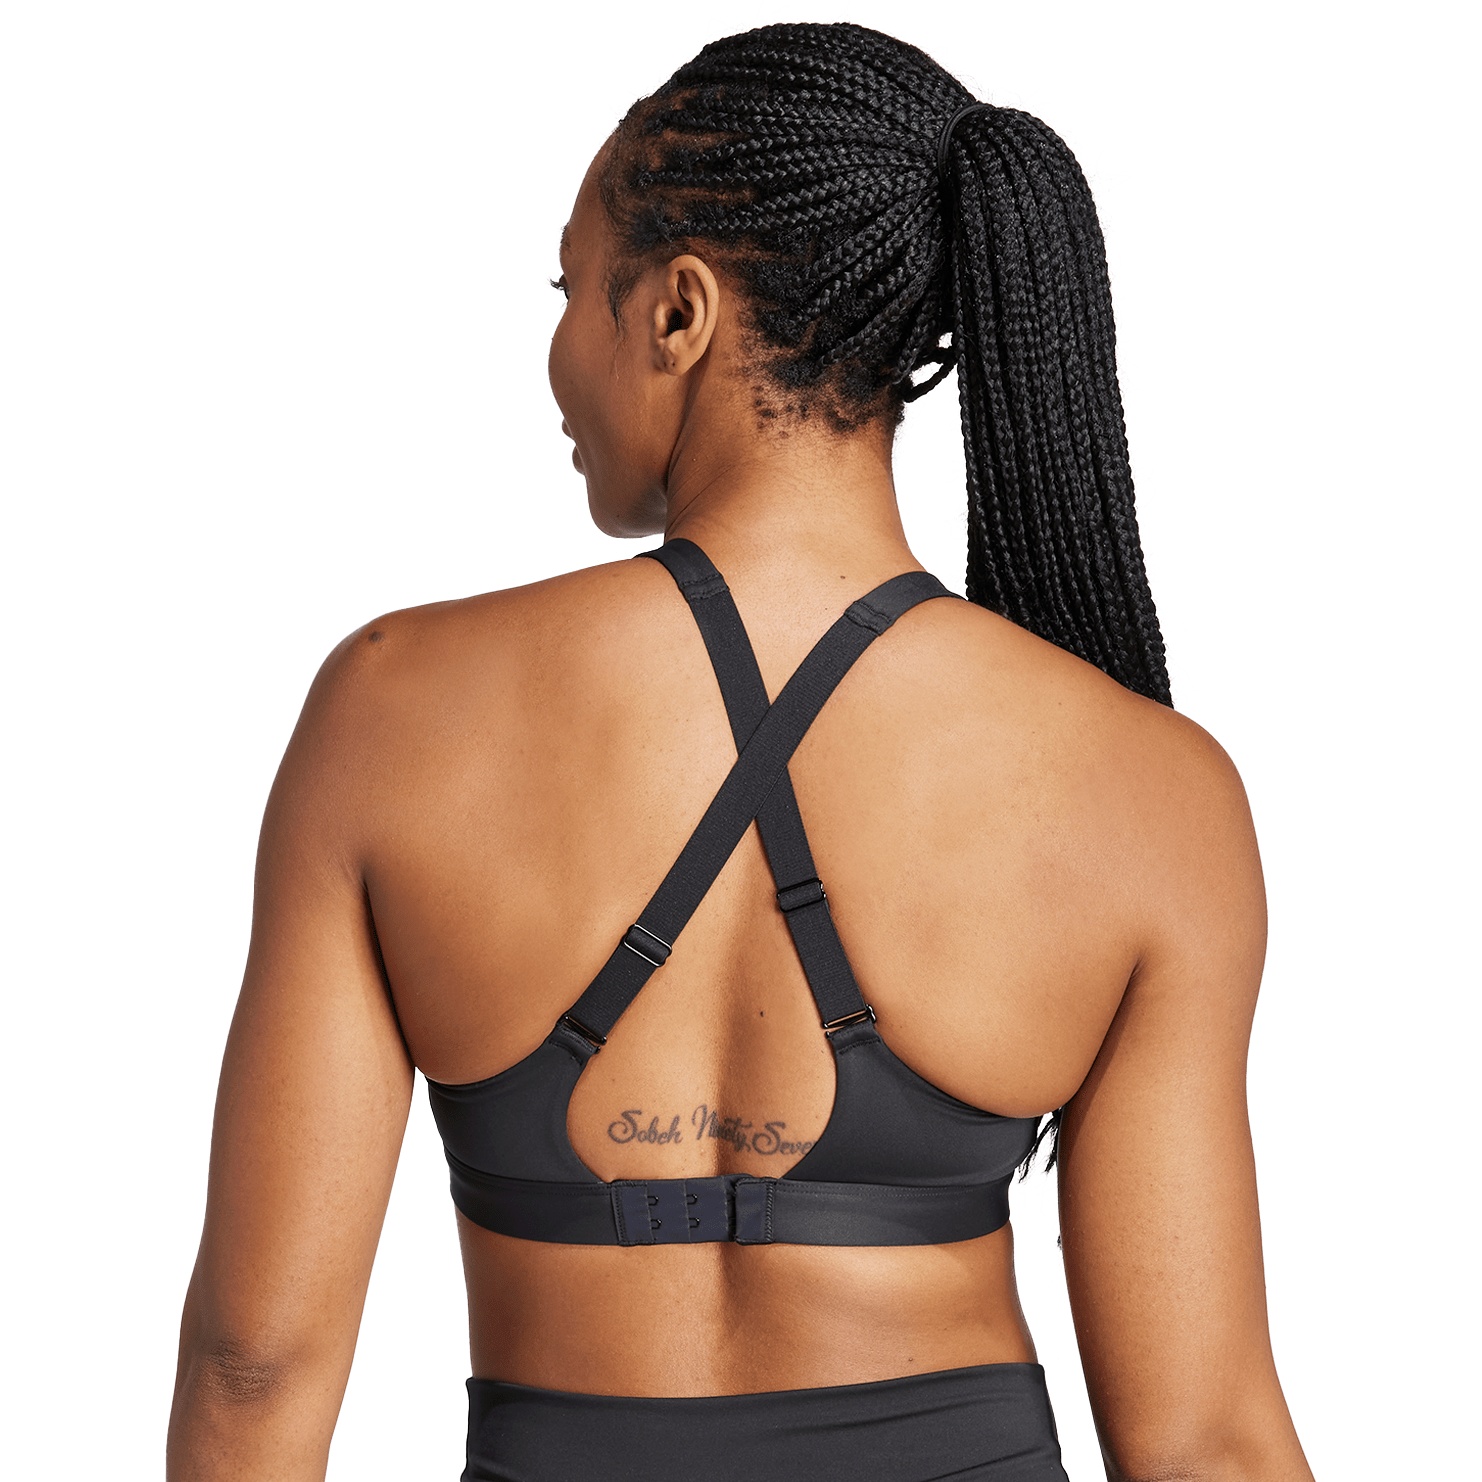 adidas TLRDREACT Training High-Support Sports Bra Women - Cup size